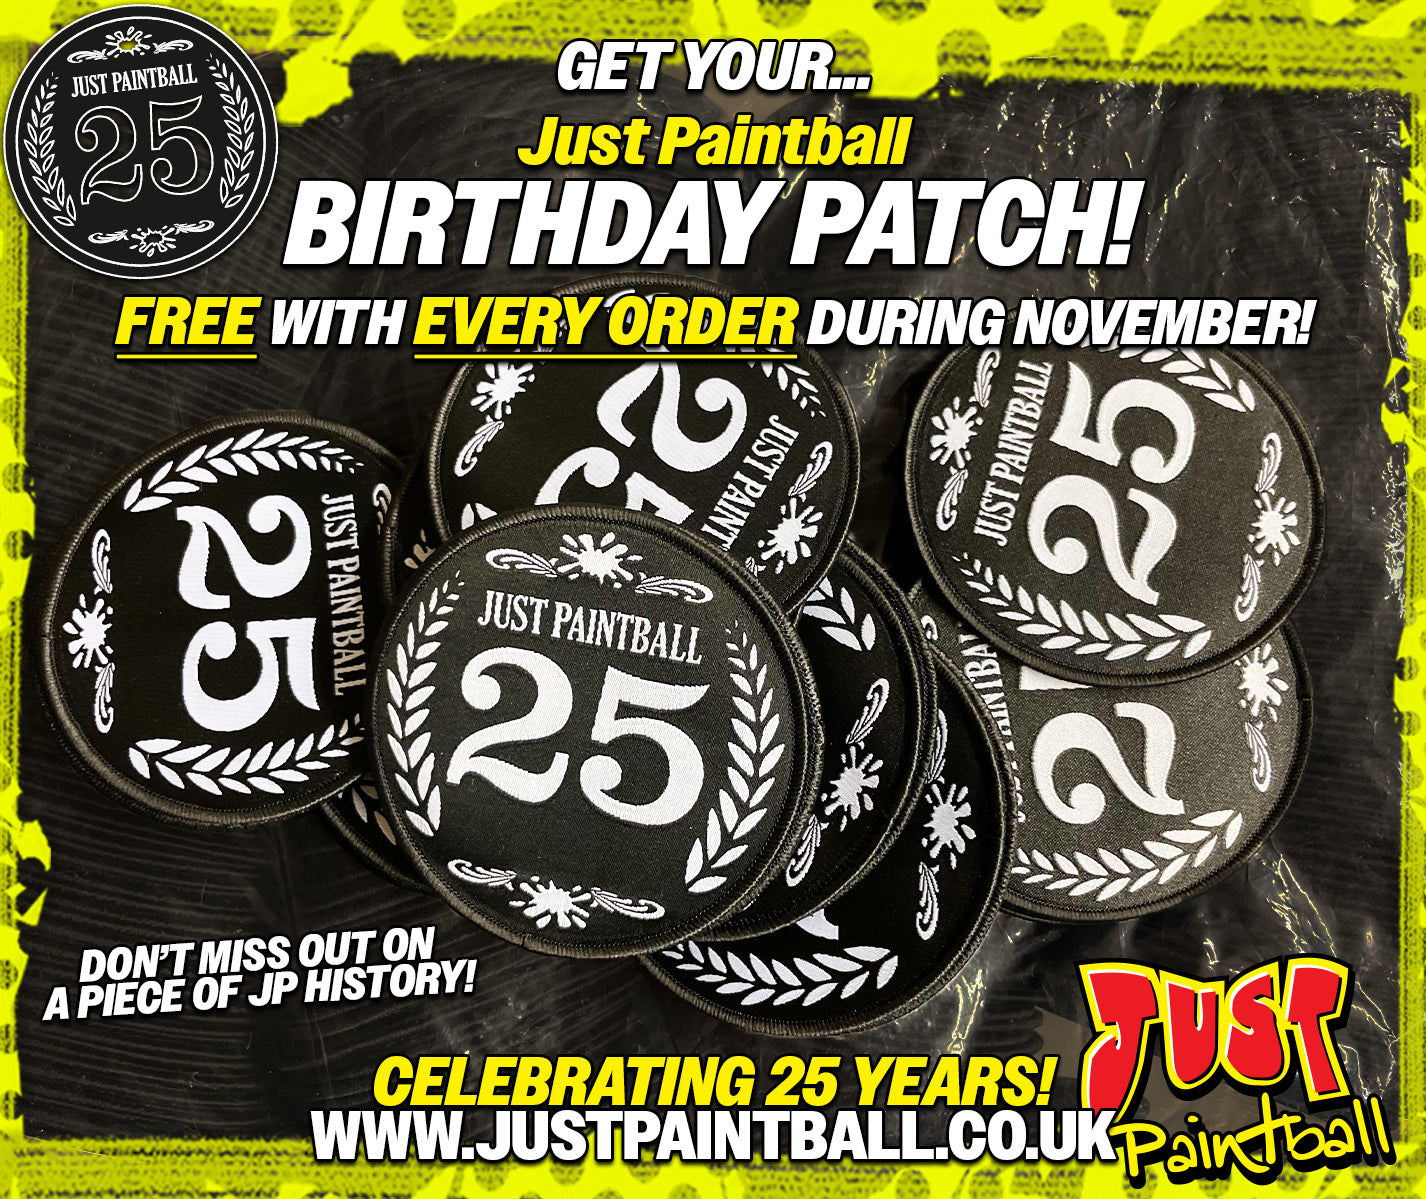 JP Birthday Patch for FREE with every order in November!